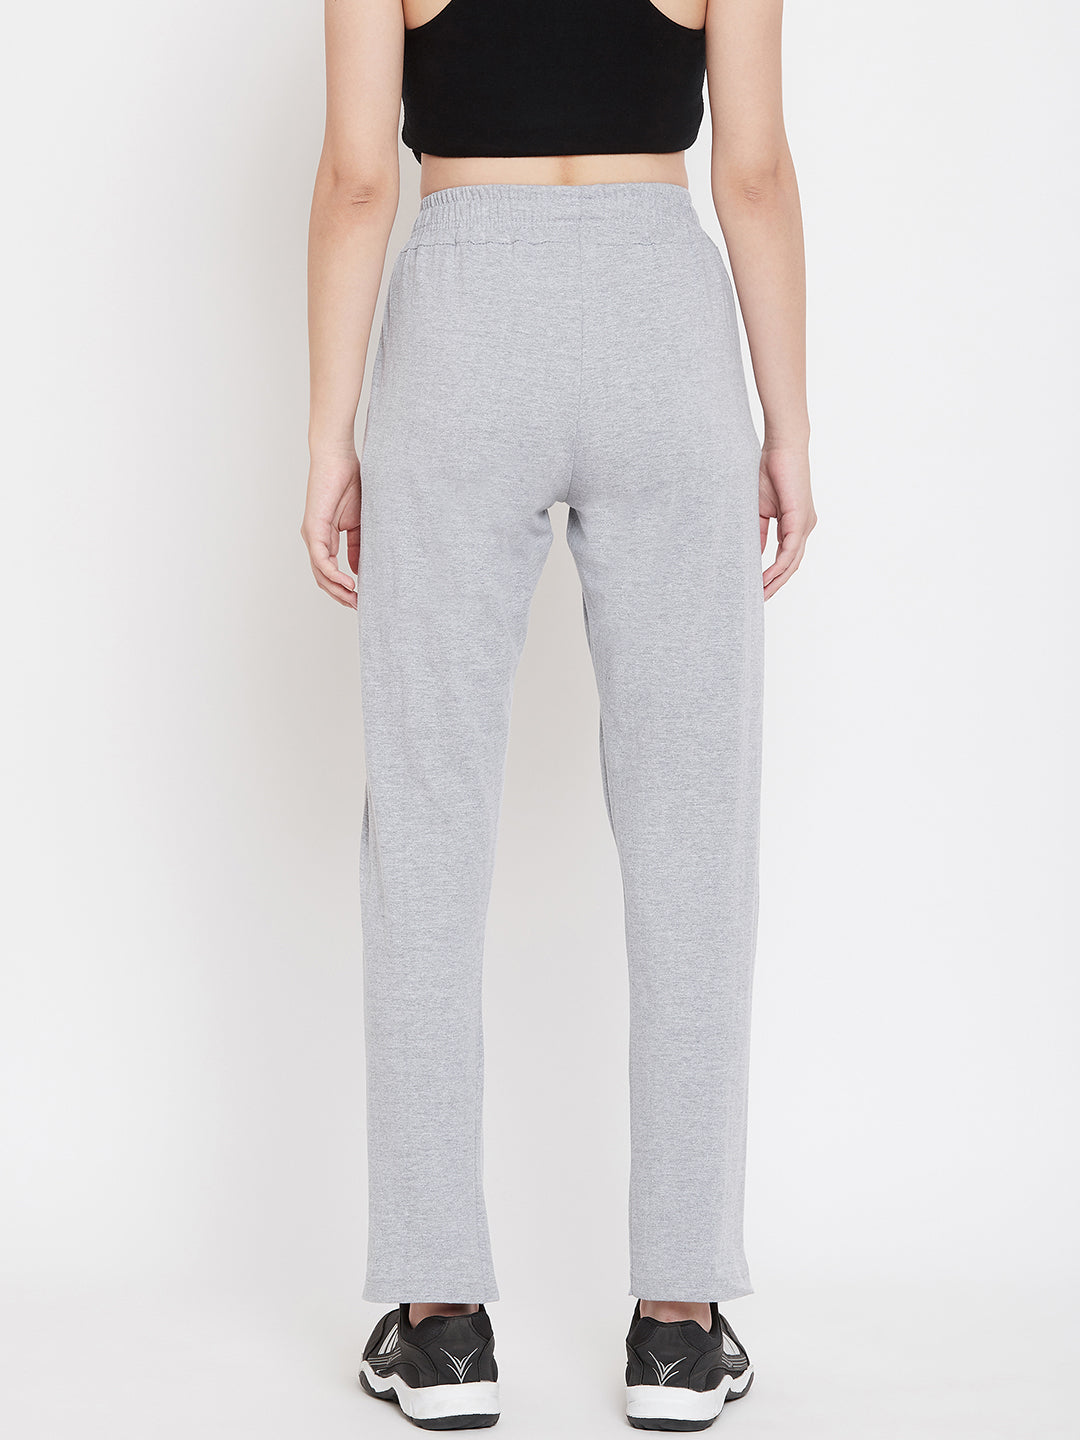 Women's Pack of 2 Track Pants-Black and Light Grey